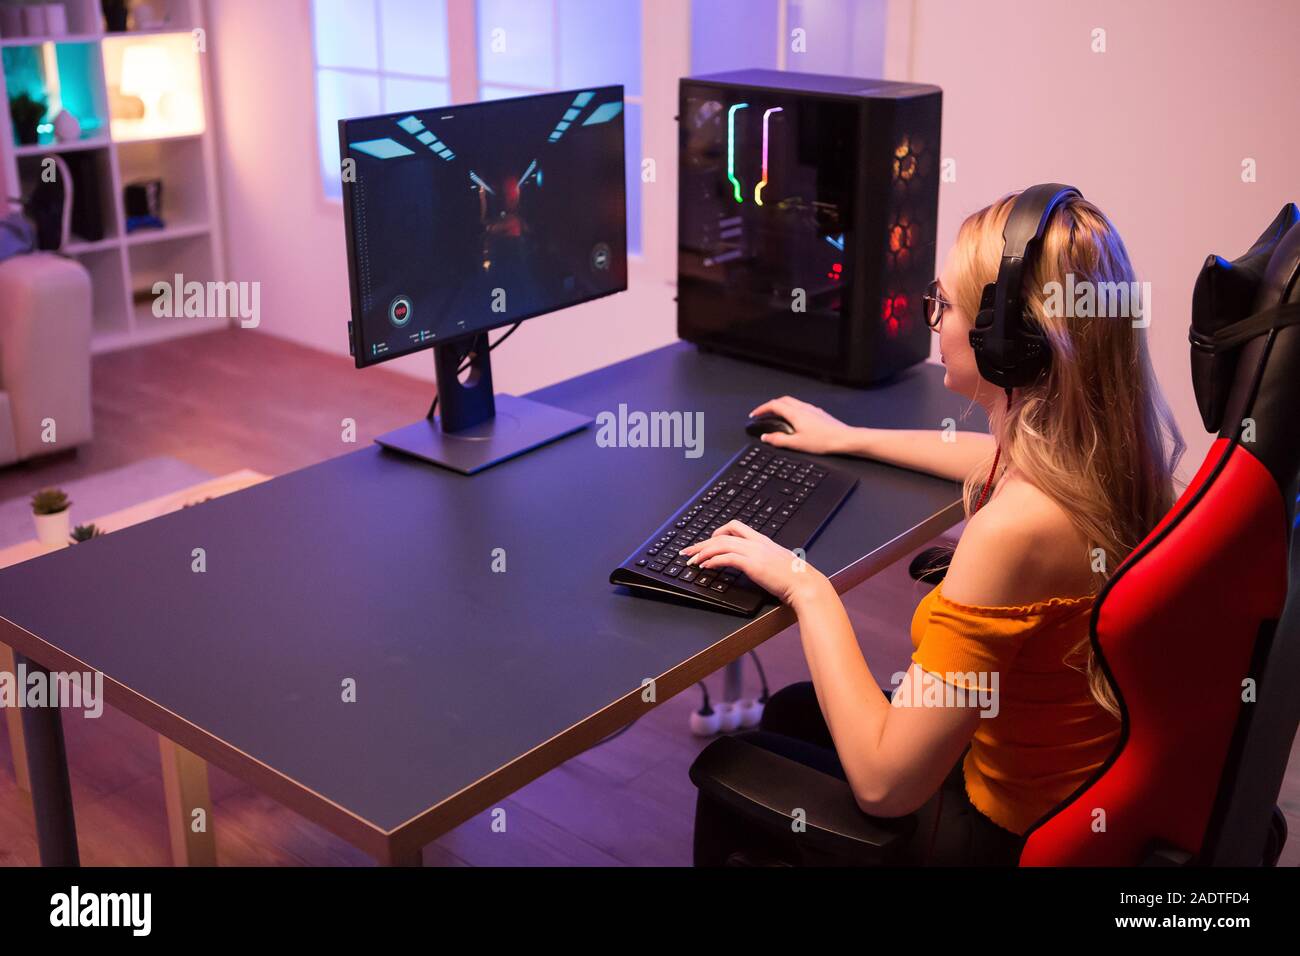 Girl Relaxing Playing Games On Computer And Sitting On A Gaming